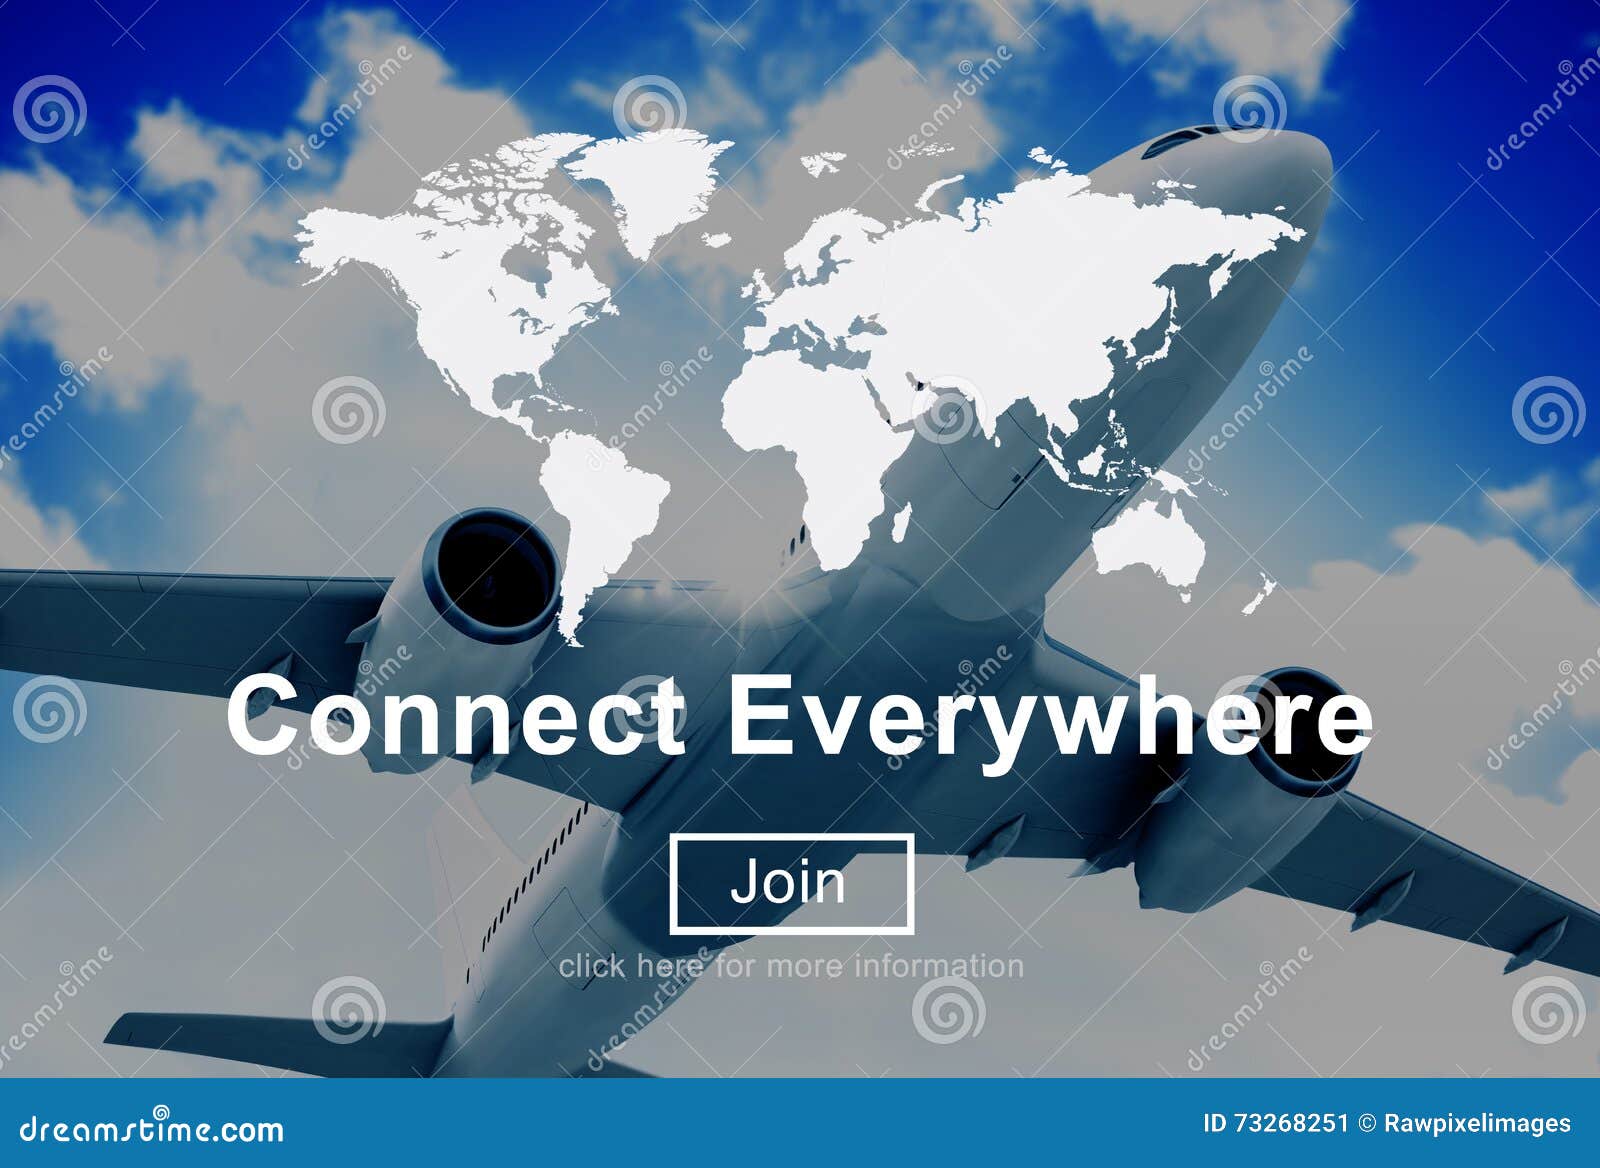 connect everywhere global network worldwide concept